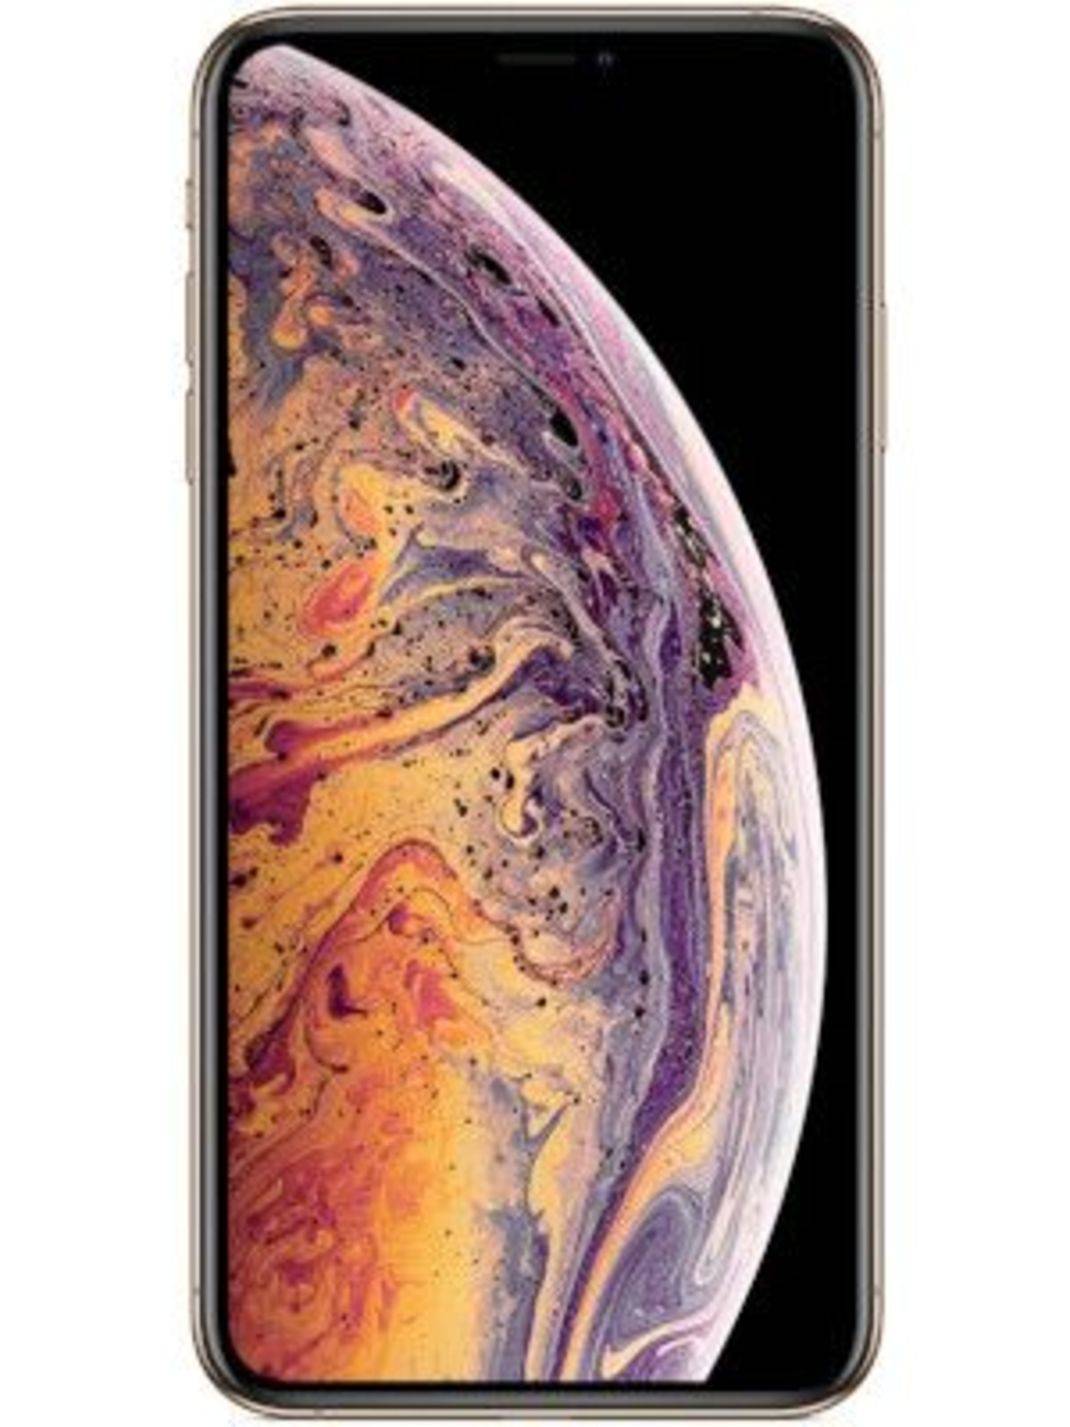 Compare Apple Iphone Xs Max Vs Samsung Galaxy S10 Plus Price Specs Review Gadgets Now